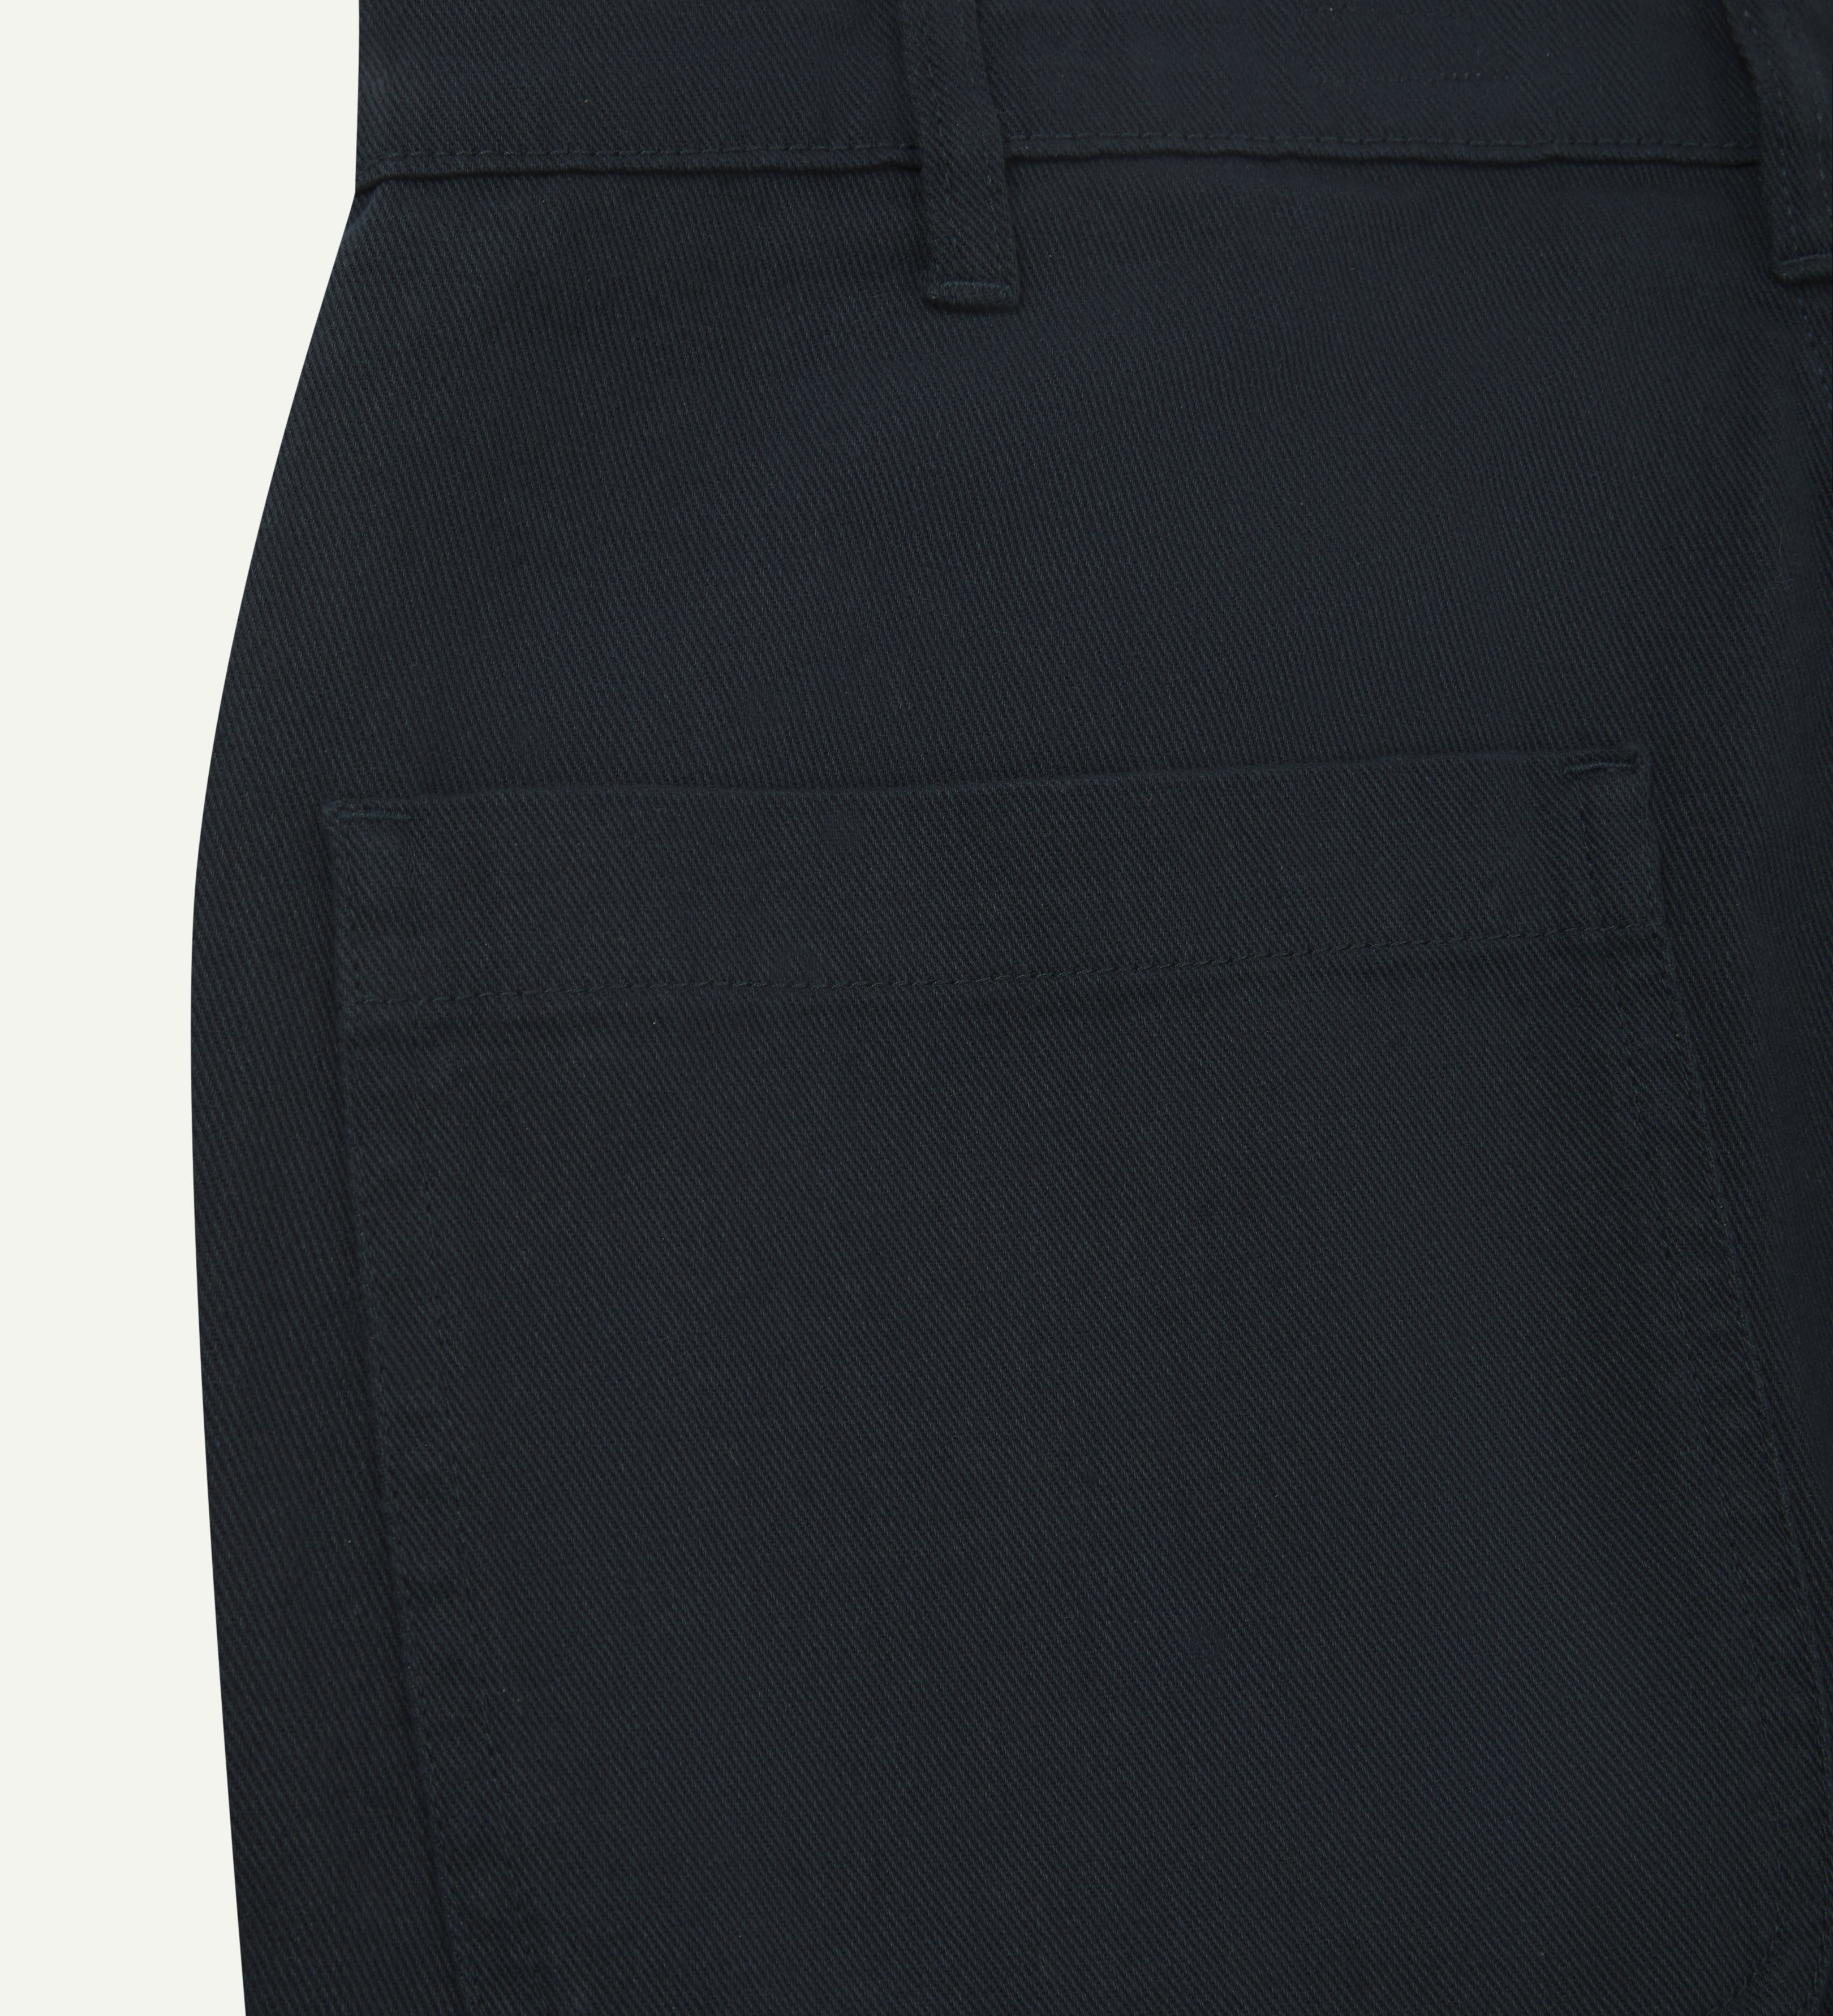 Back close-up view of uskees cotton drill 'commuter' trousers for men in dark blue showing back pocket and belt loops.